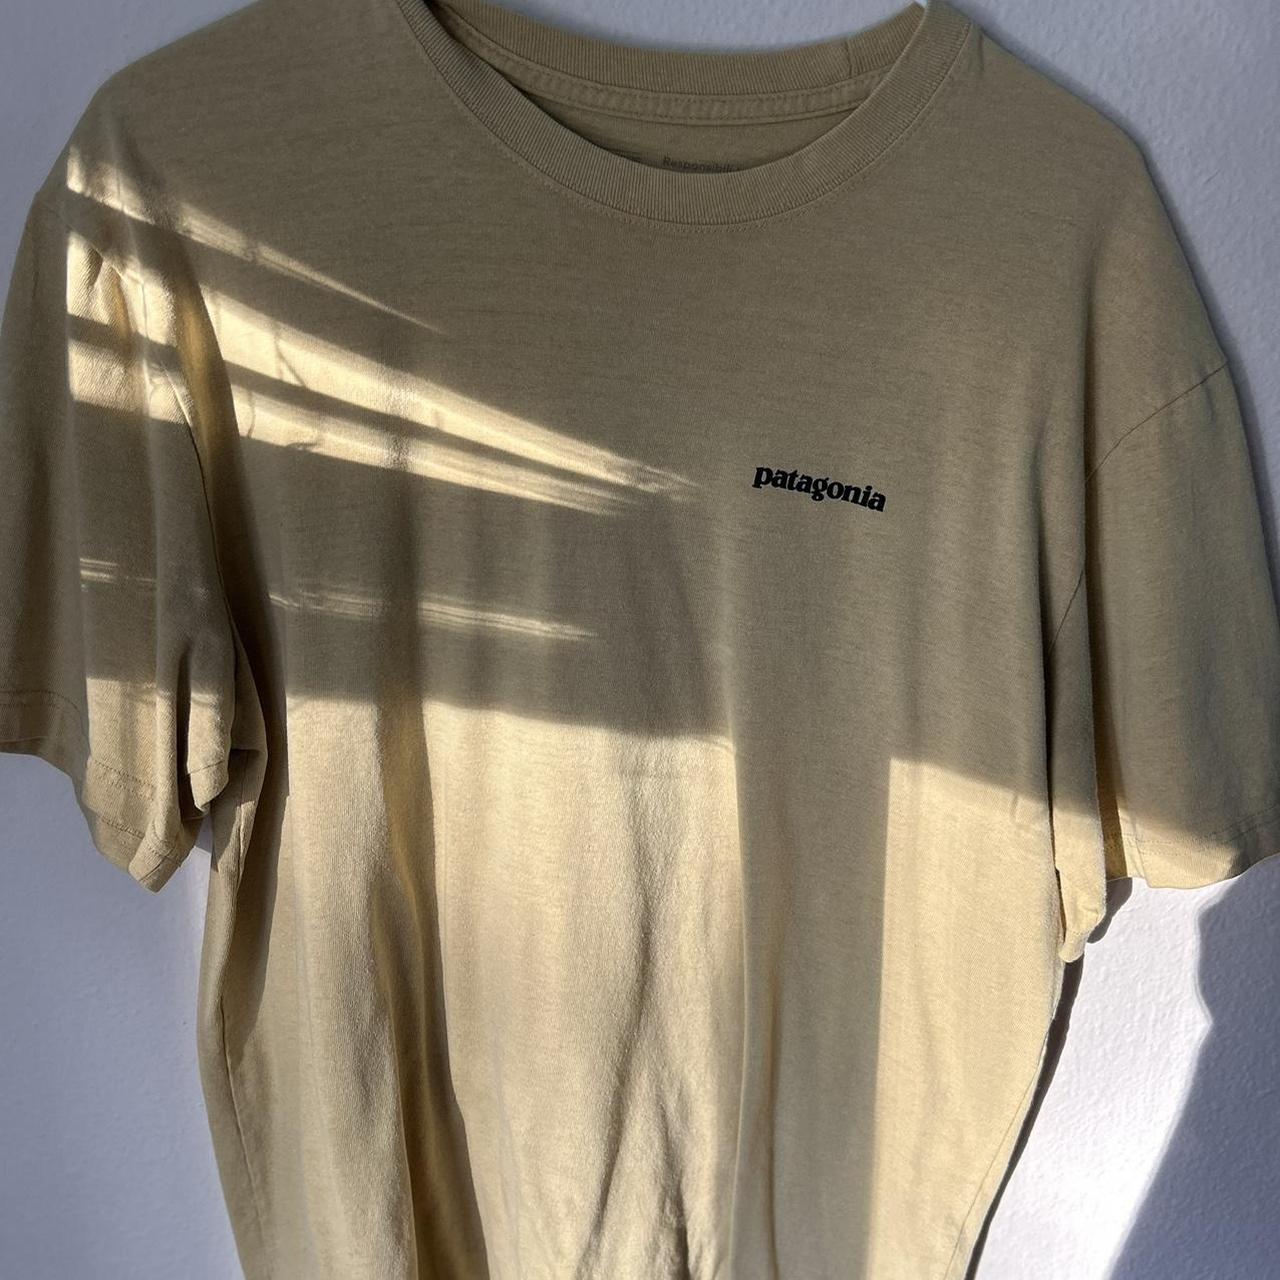 Large Shirt for condition - Depop